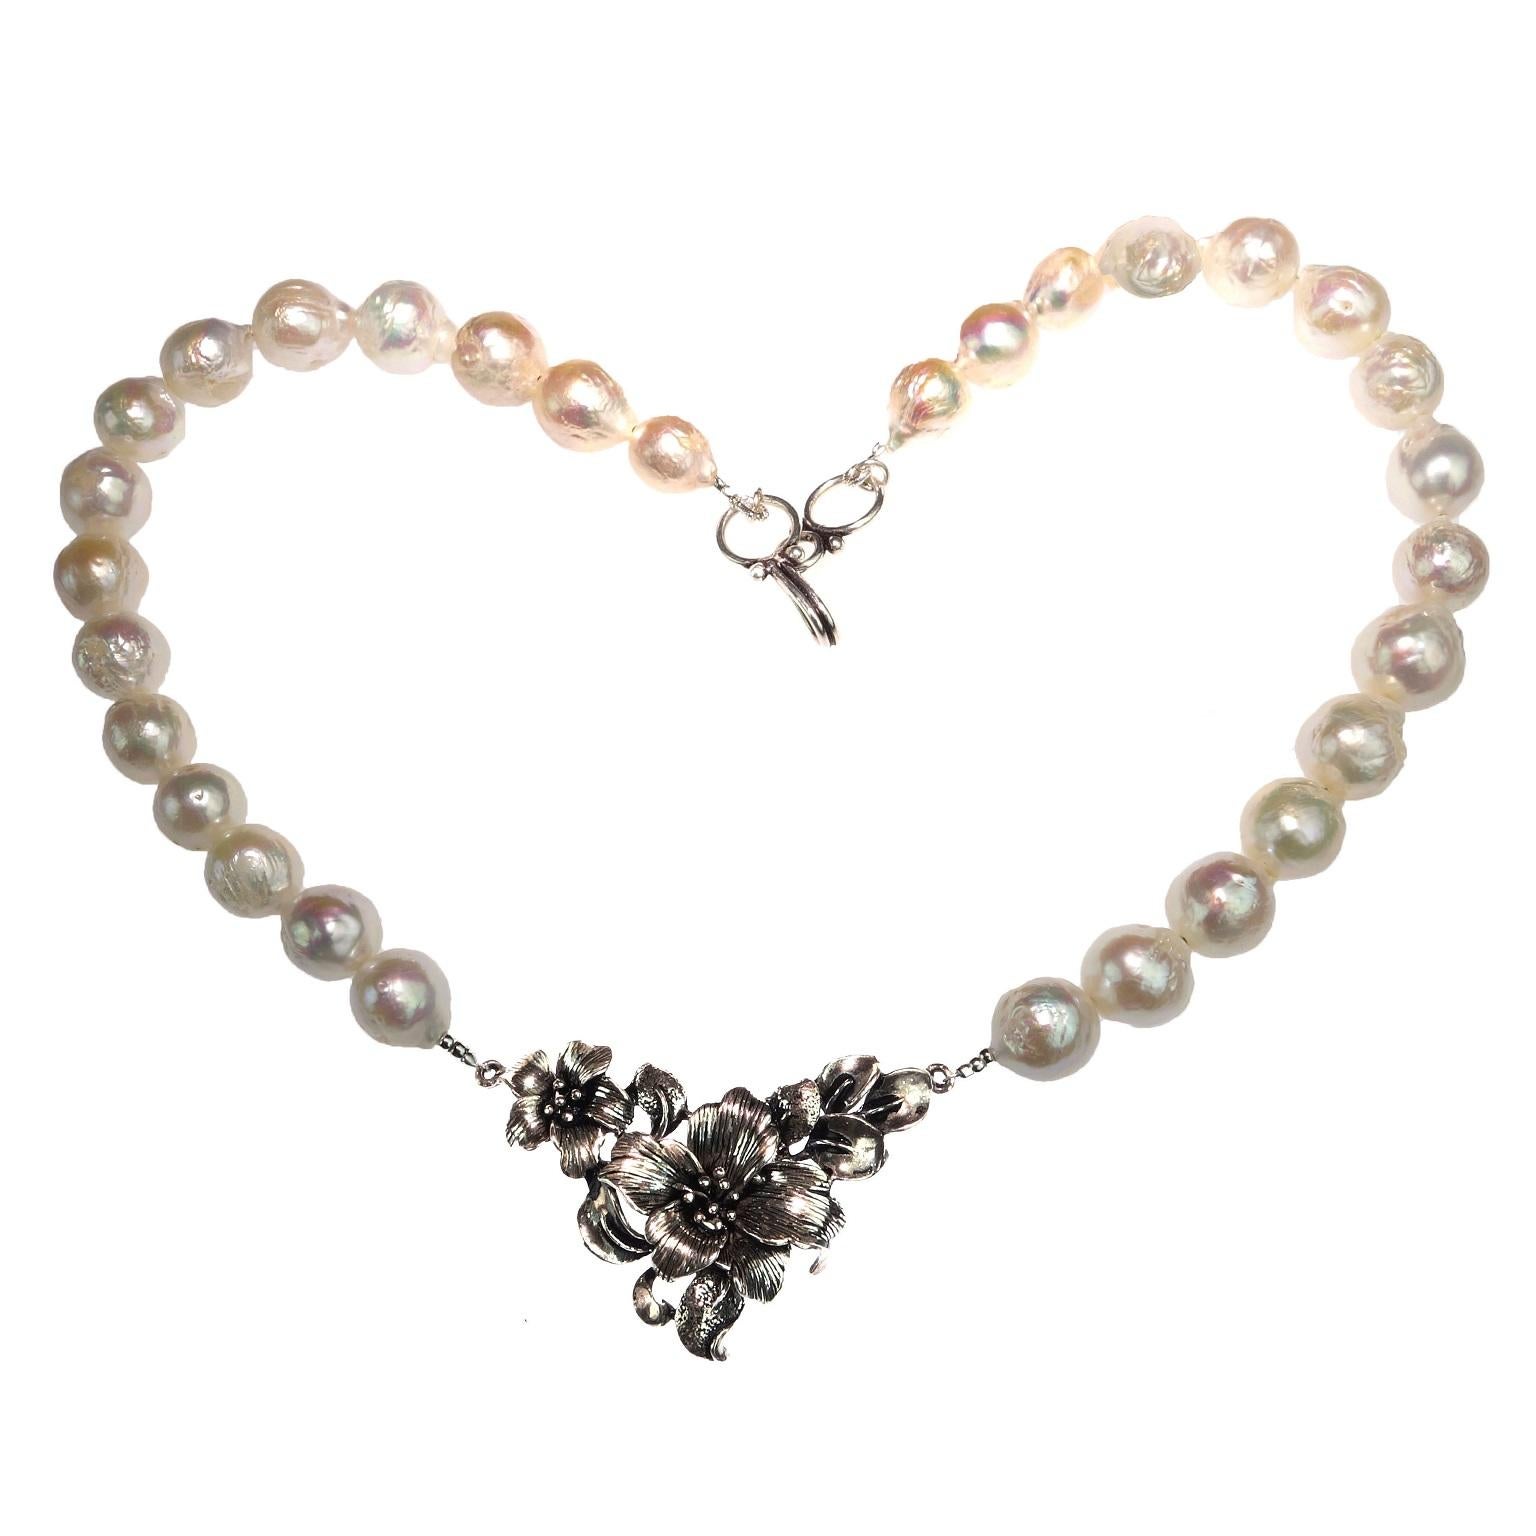 Captivating, custom made pearl necklace with Floral Sterling Silver focal. You will love this unique 16 inch necklace with a lovely 1.5x1 inch focal sitting just at the base of your neck. The glowing white wrinkle pearls enhance all skin tones.